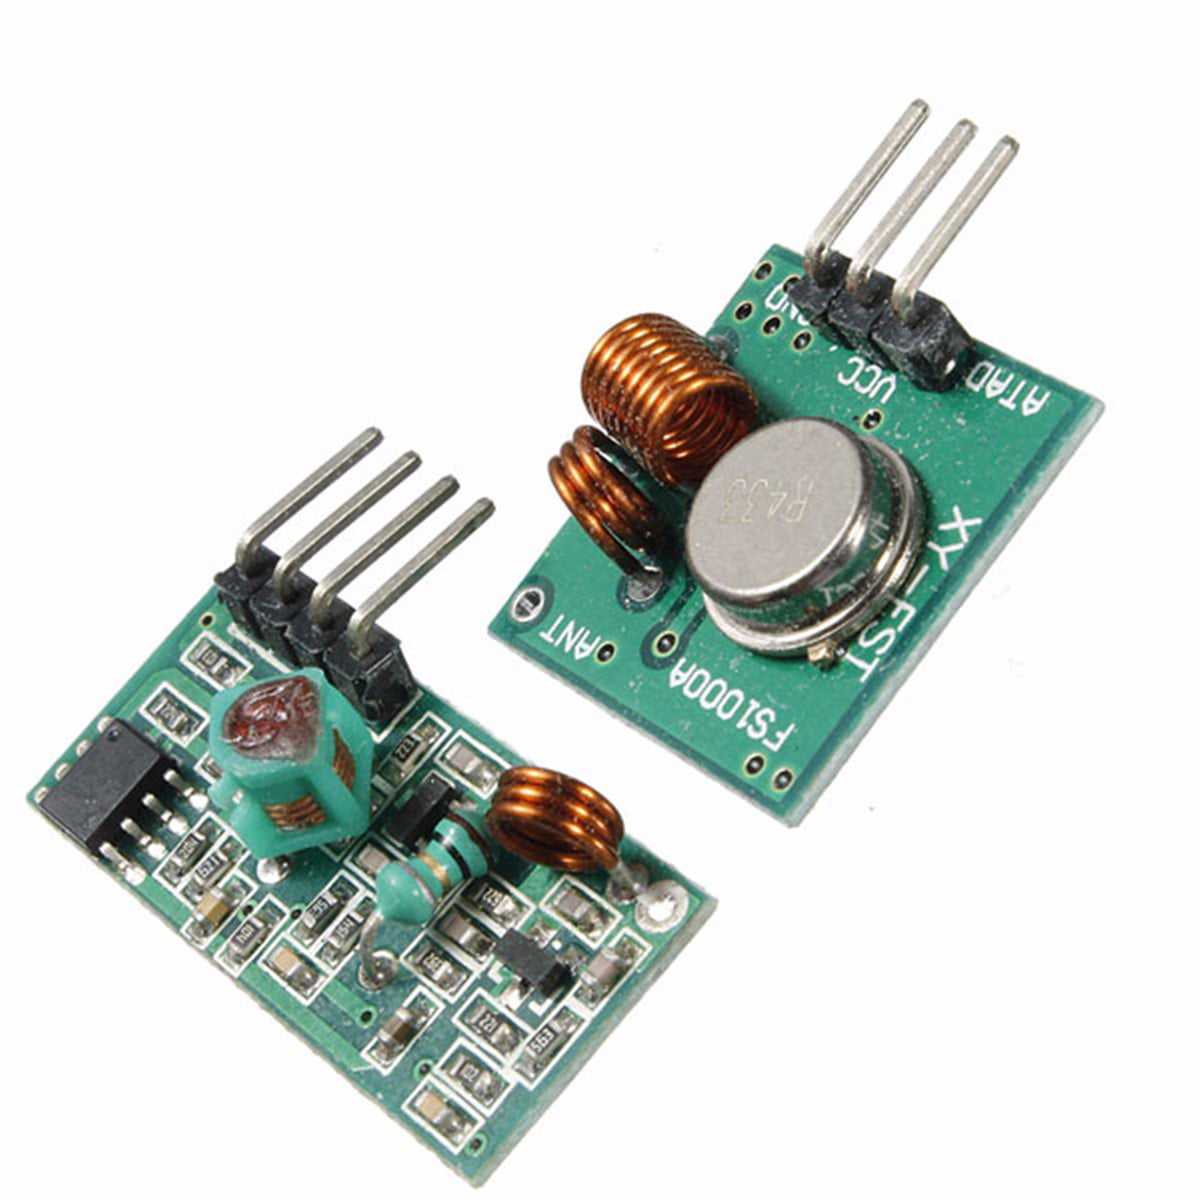 USA seller 4X 433Mhz RF Transmitter and Receiver Module link kit for Arduino 